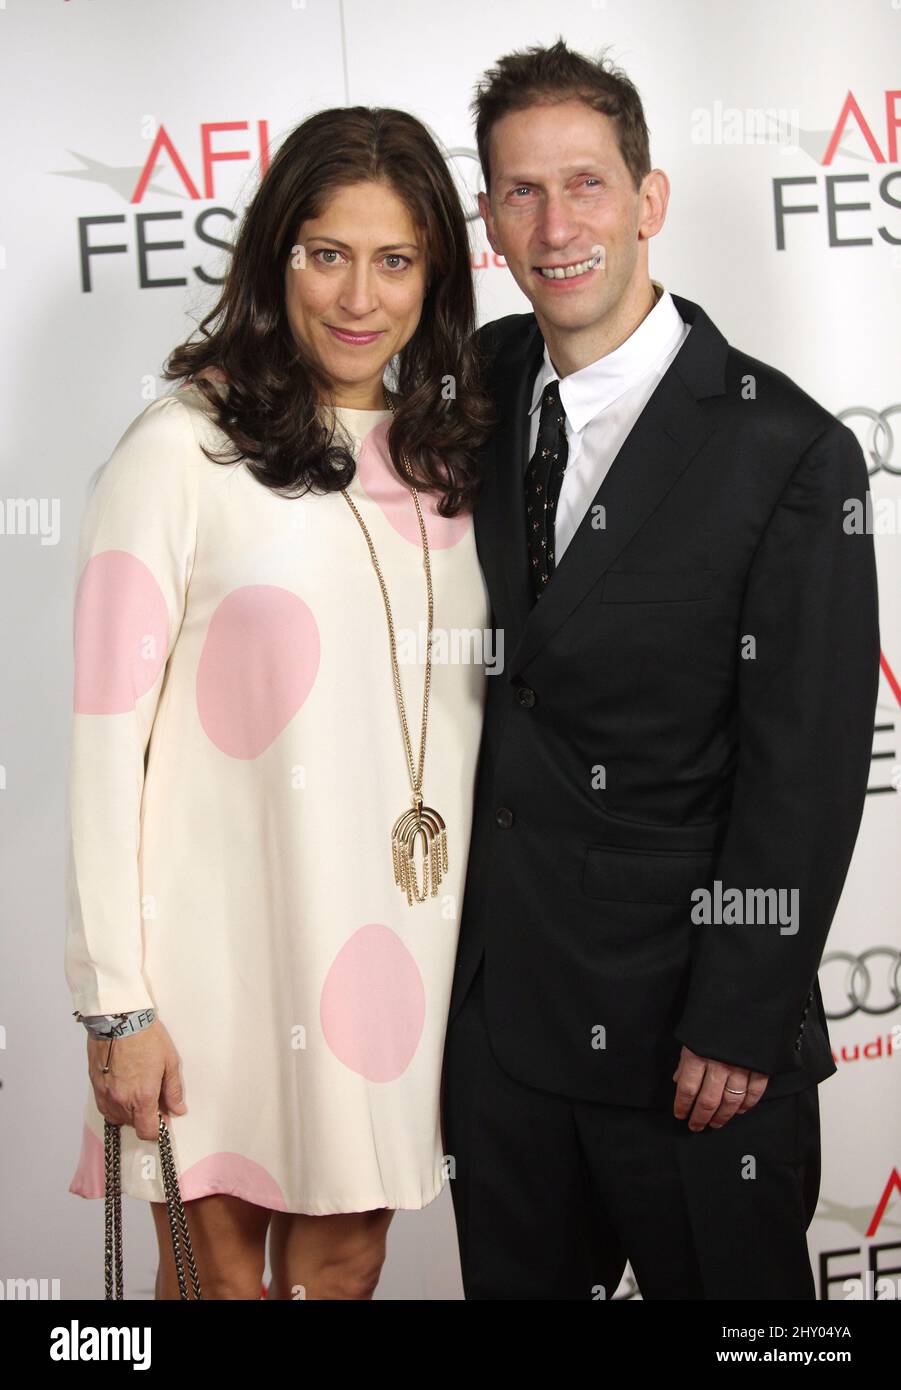 Tim Blake Nelson & Lisa Benavides attends the premiere of 'Lincoln' at the closing night gala of AFI FEST 2012 held at Grauman's Chinese Theatre, Los Angeles. Stock Photo